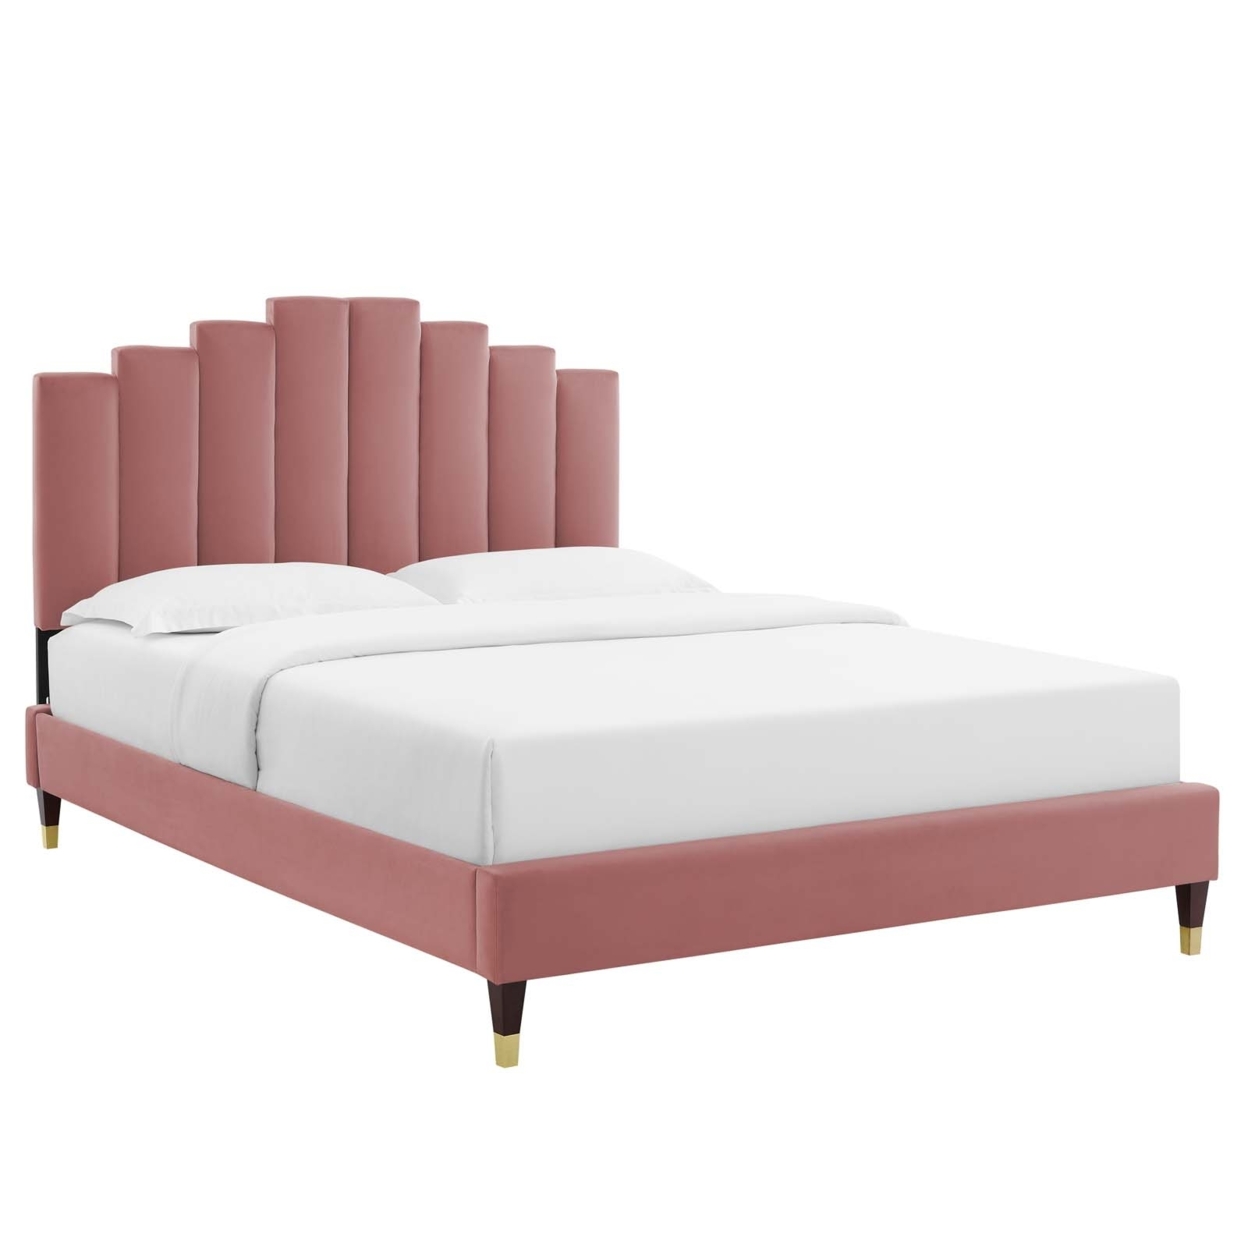 Channel Tufted Twin Platform Bed With Gold Sleeve Wood Leg, Pink, Saltoro Sherpi